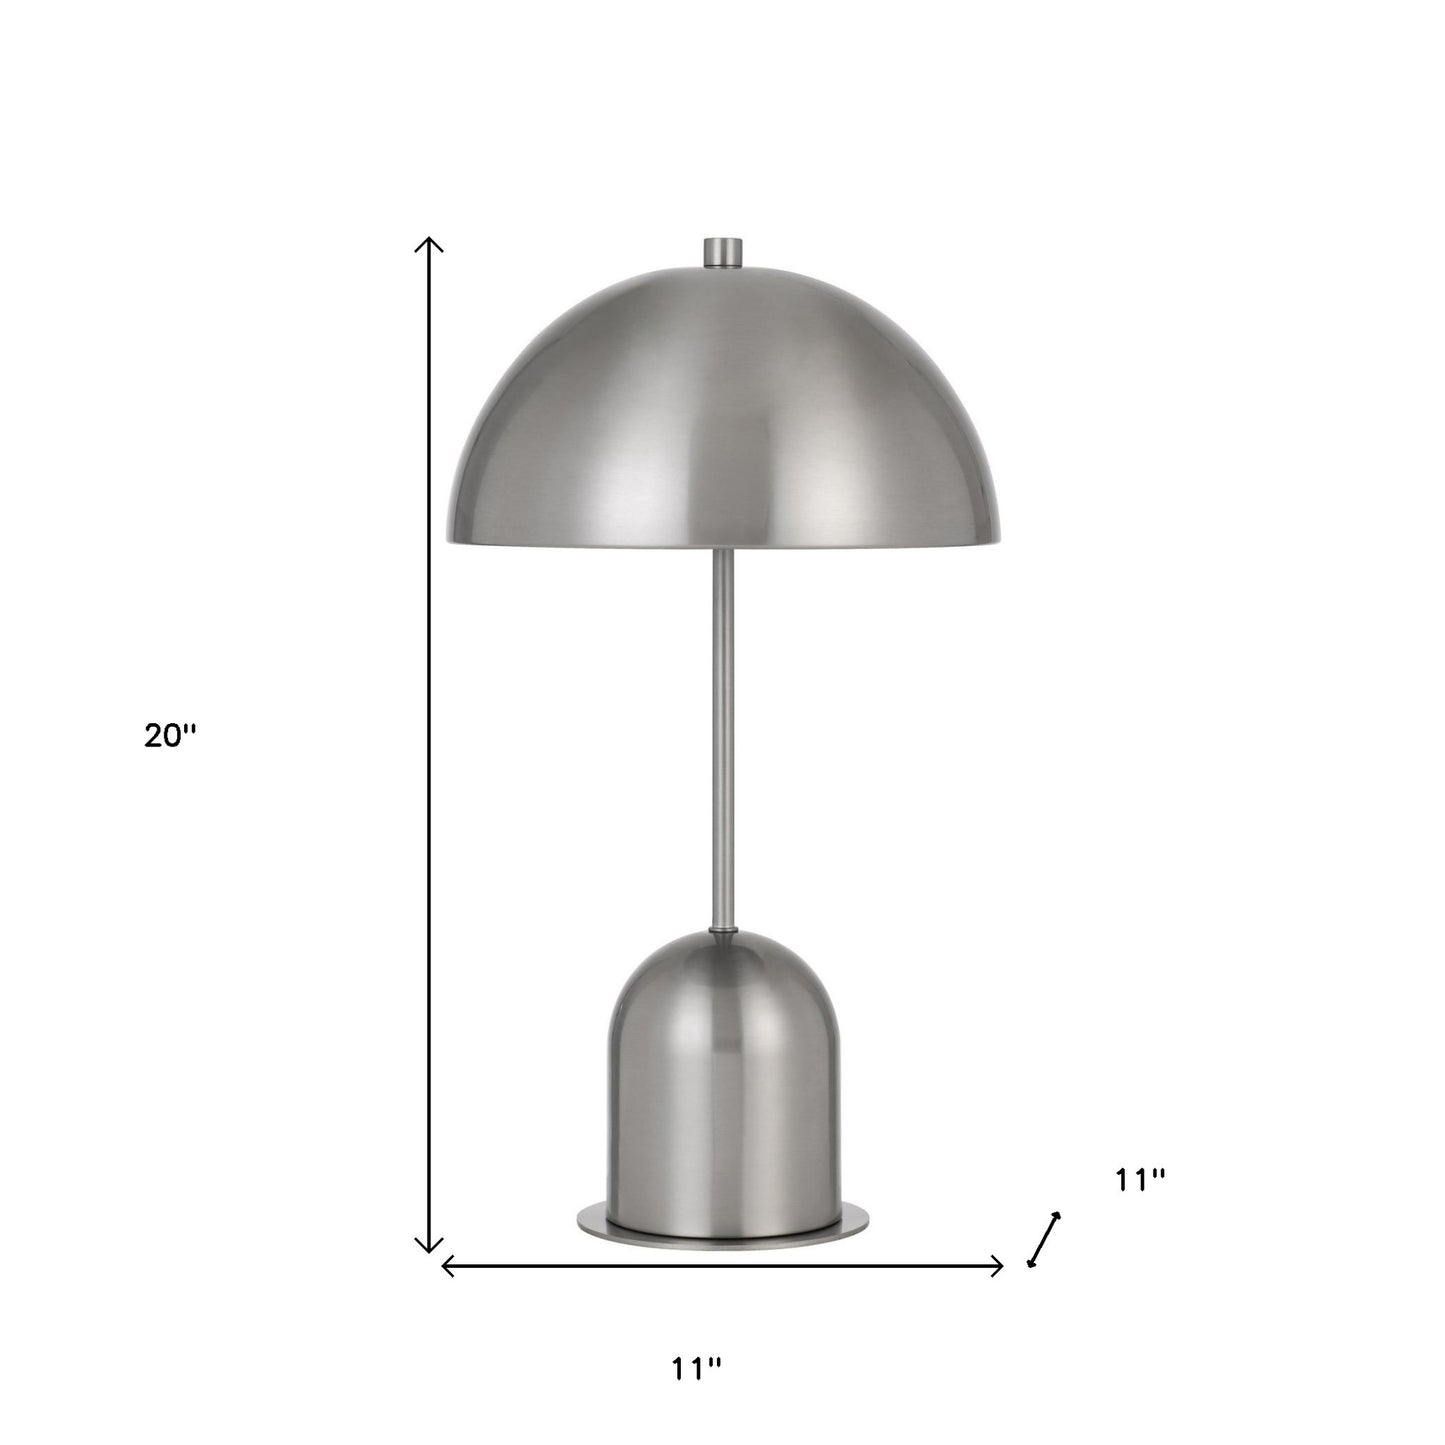 20" Nickel Metal Desk Table Lamp With Nickel Dome Shade